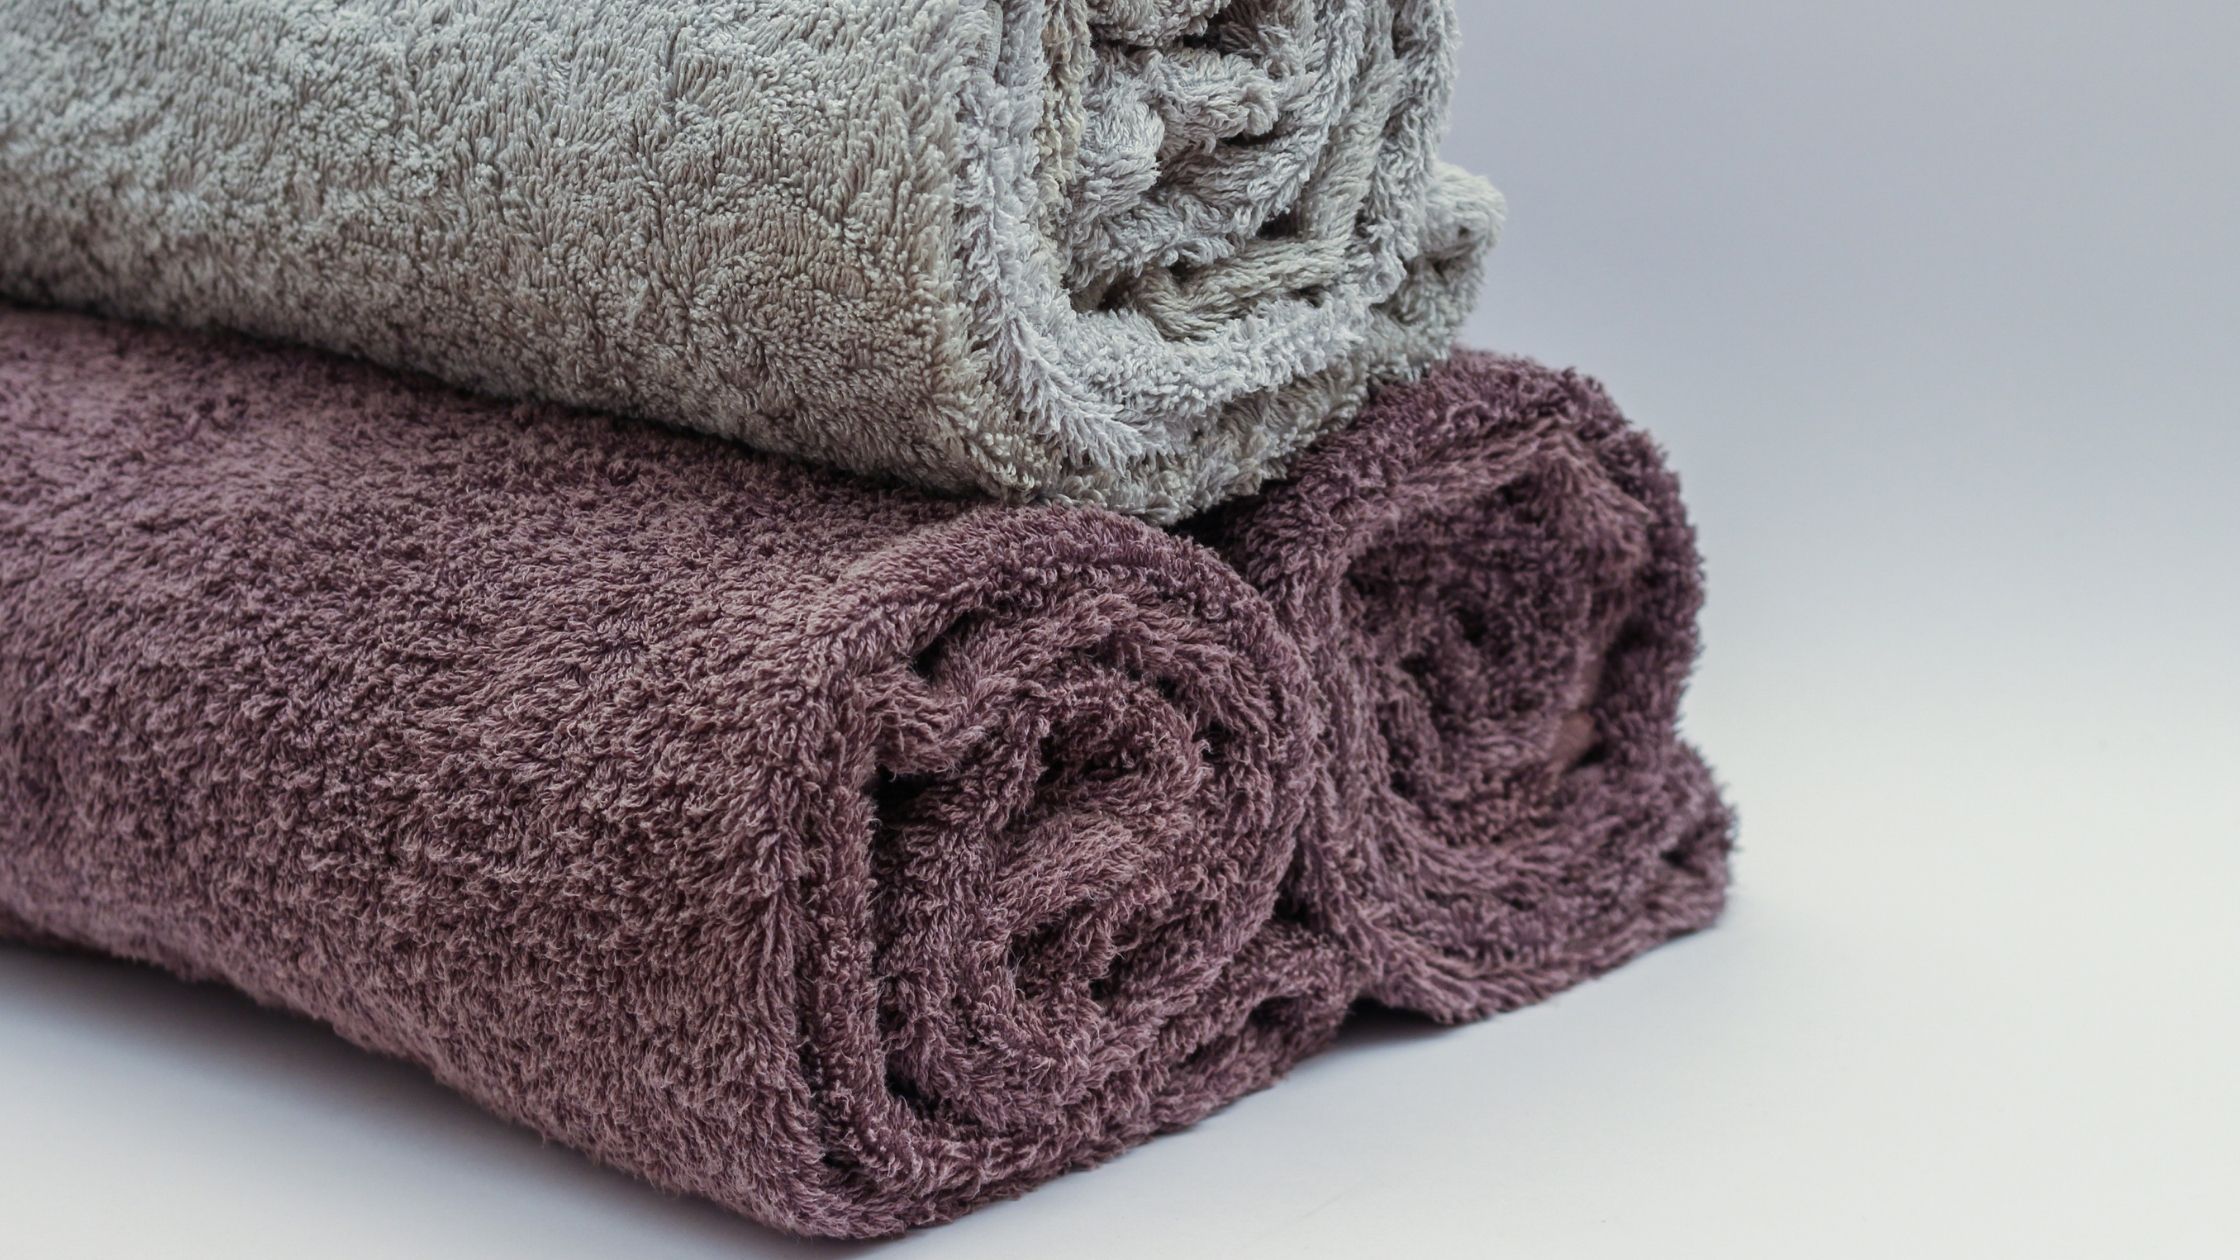 A picture of rolled up towels.